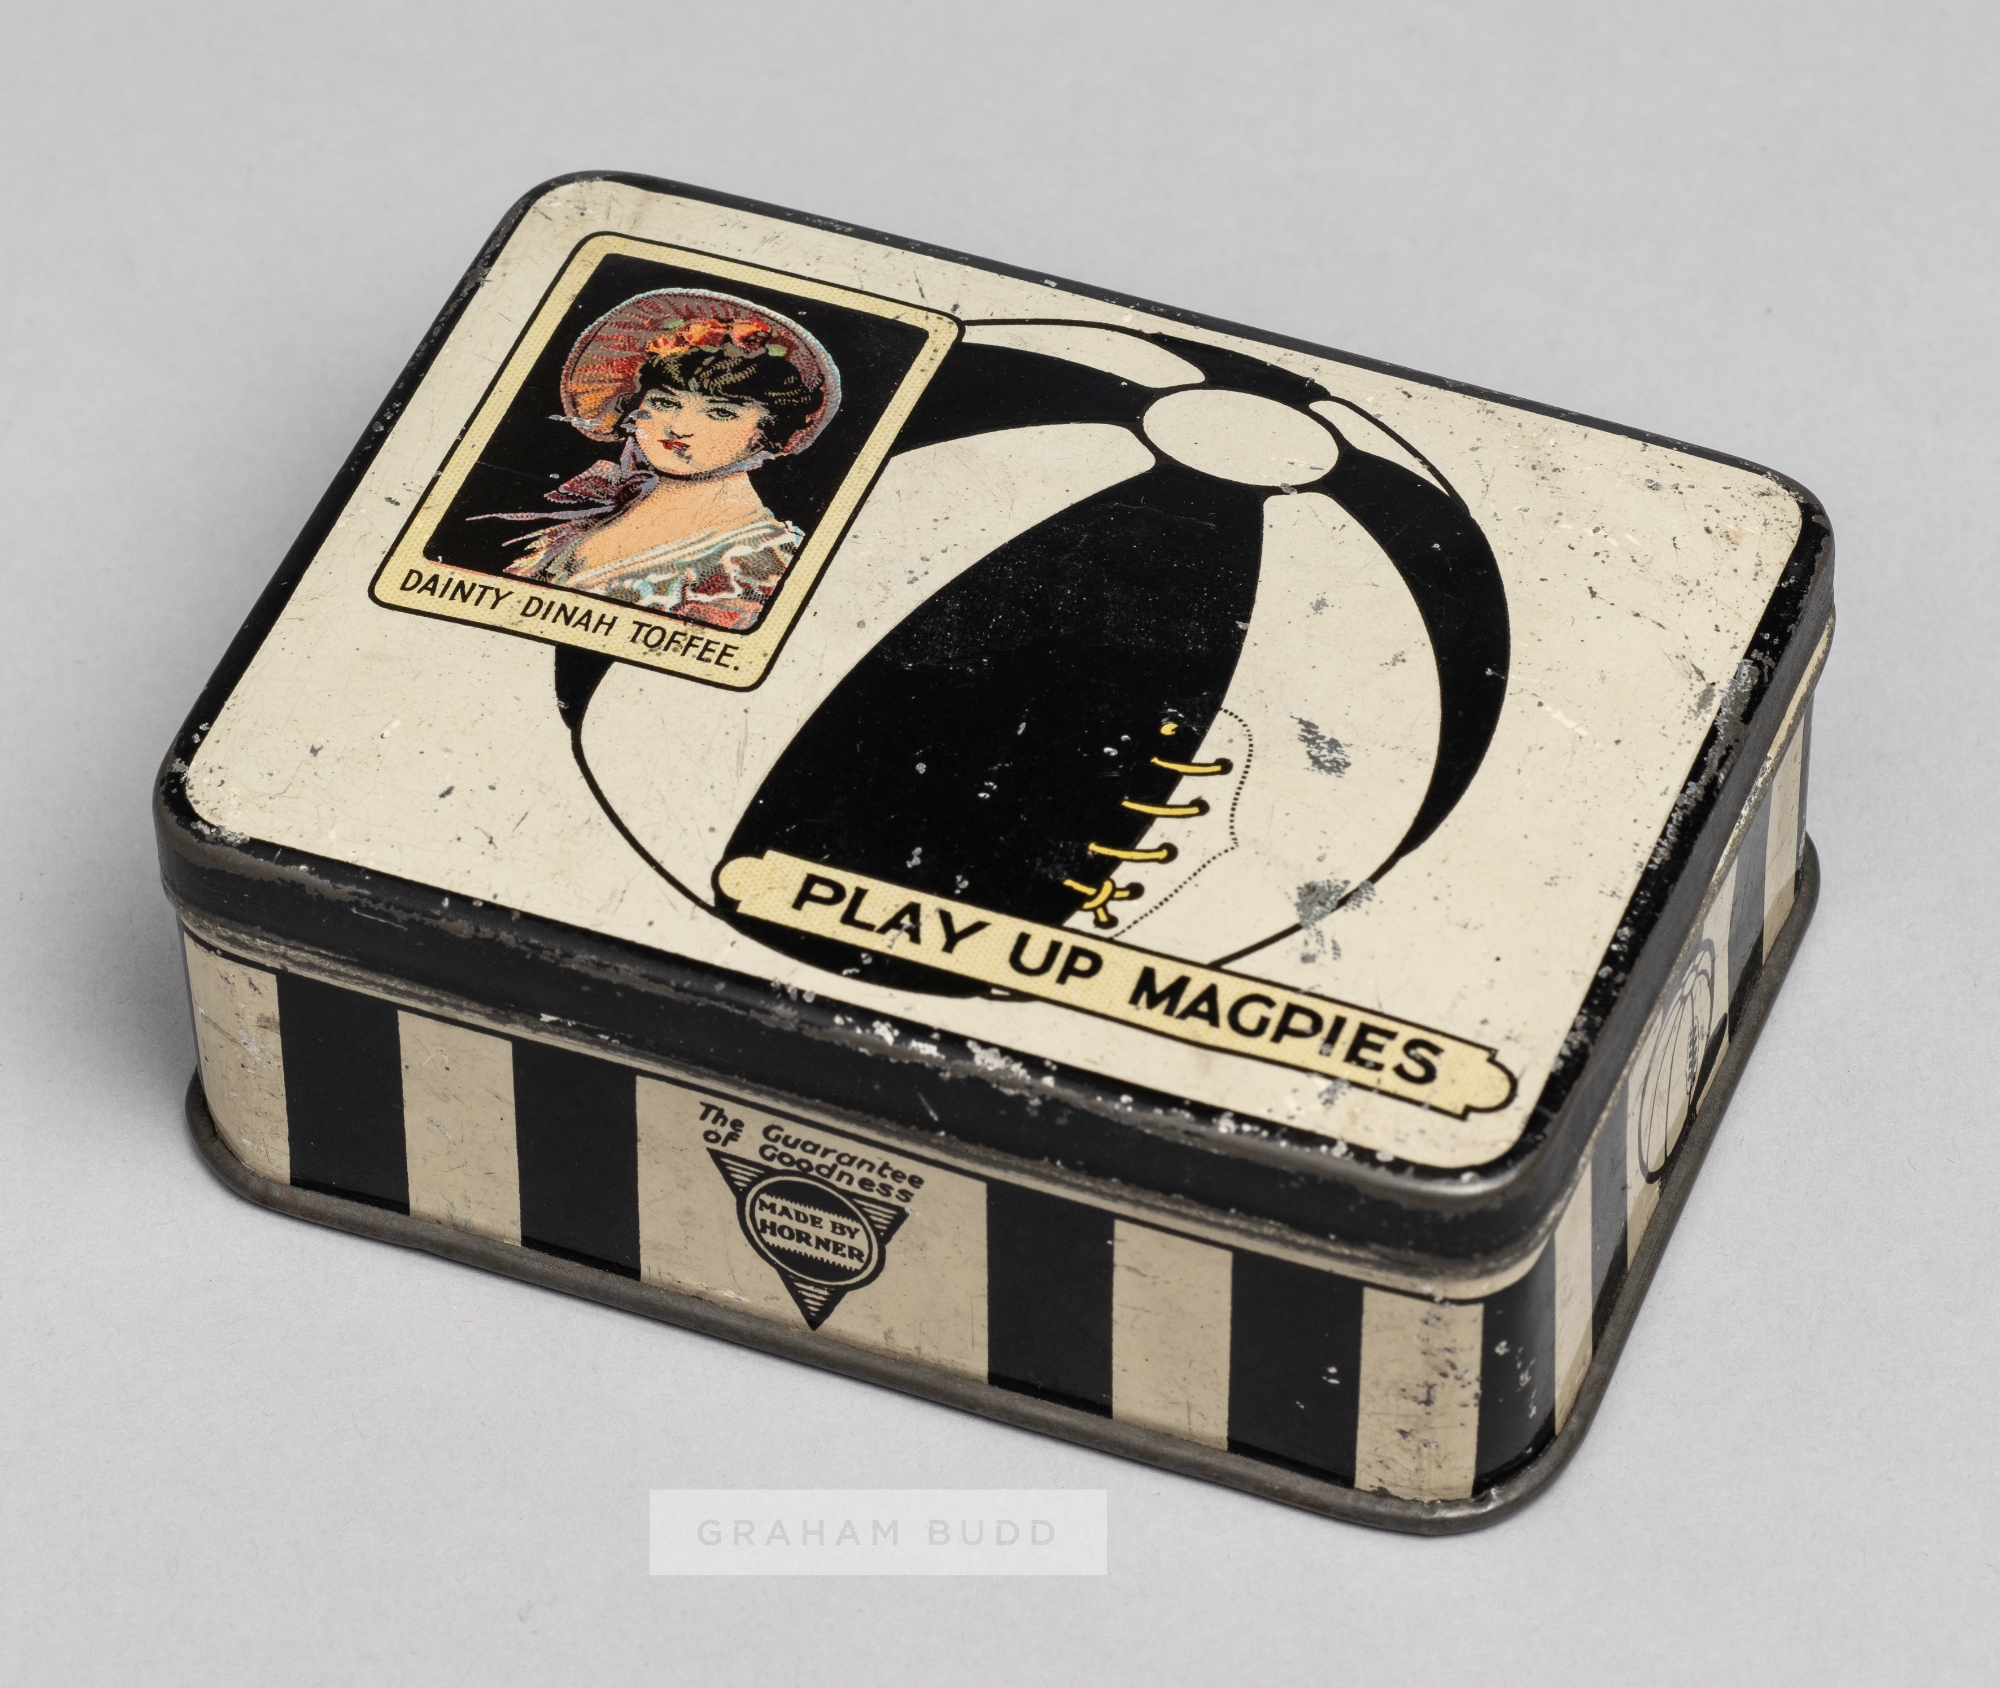 Dainty Dinah Toffee "Play Up Magpies" Newcastle United tin, circa 1900s, with black and white